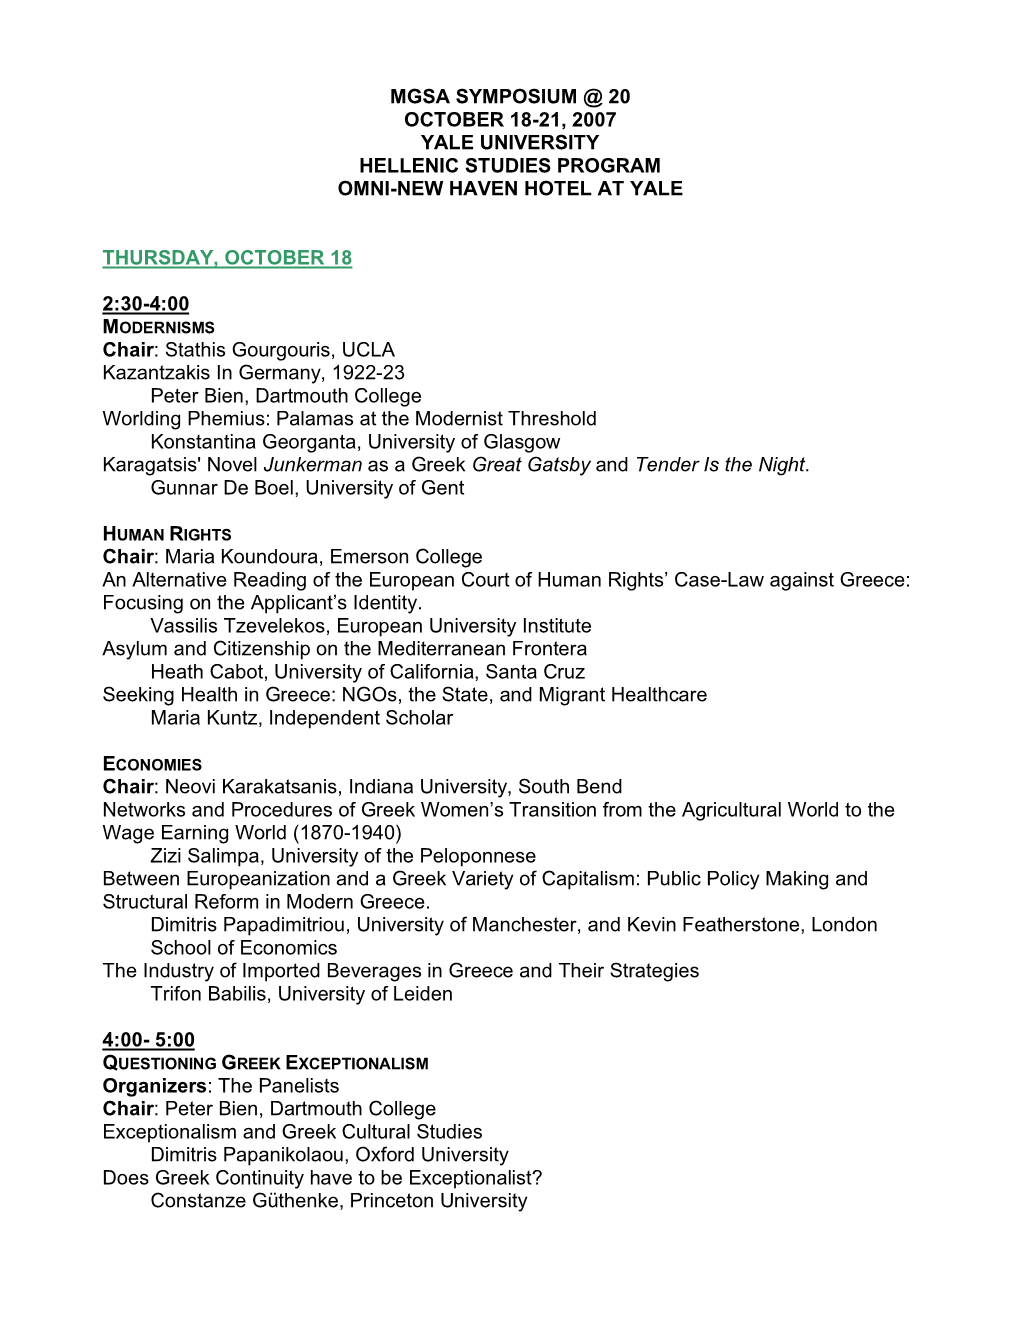 The Program As Given at the 2007 Yale Symposium